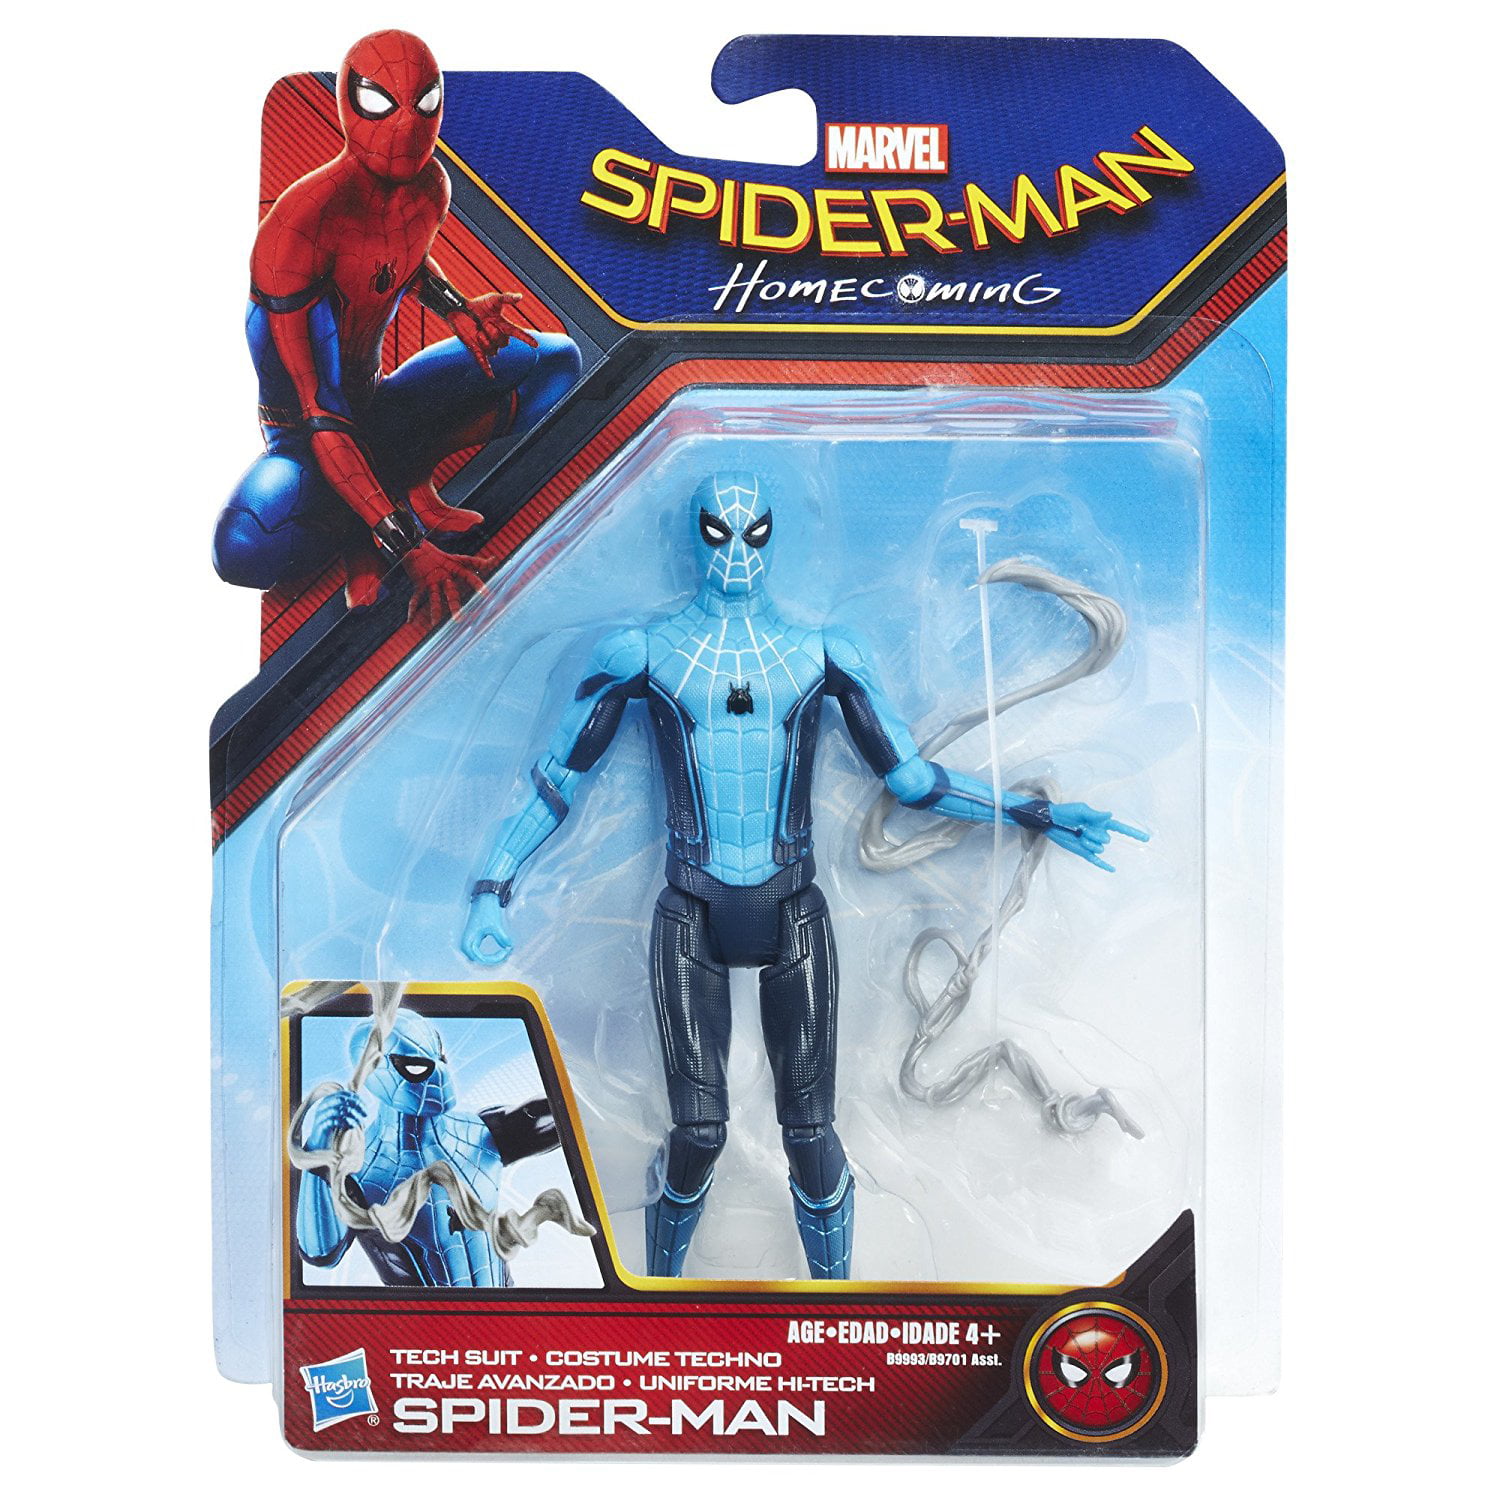 Marvel Spider-Man Homecoming 6 inch Action Figure - 15597802 0bc4 4e58 8a4c Facec78fc260 1.cc399D640933e0a0f59108Db24f5fffe